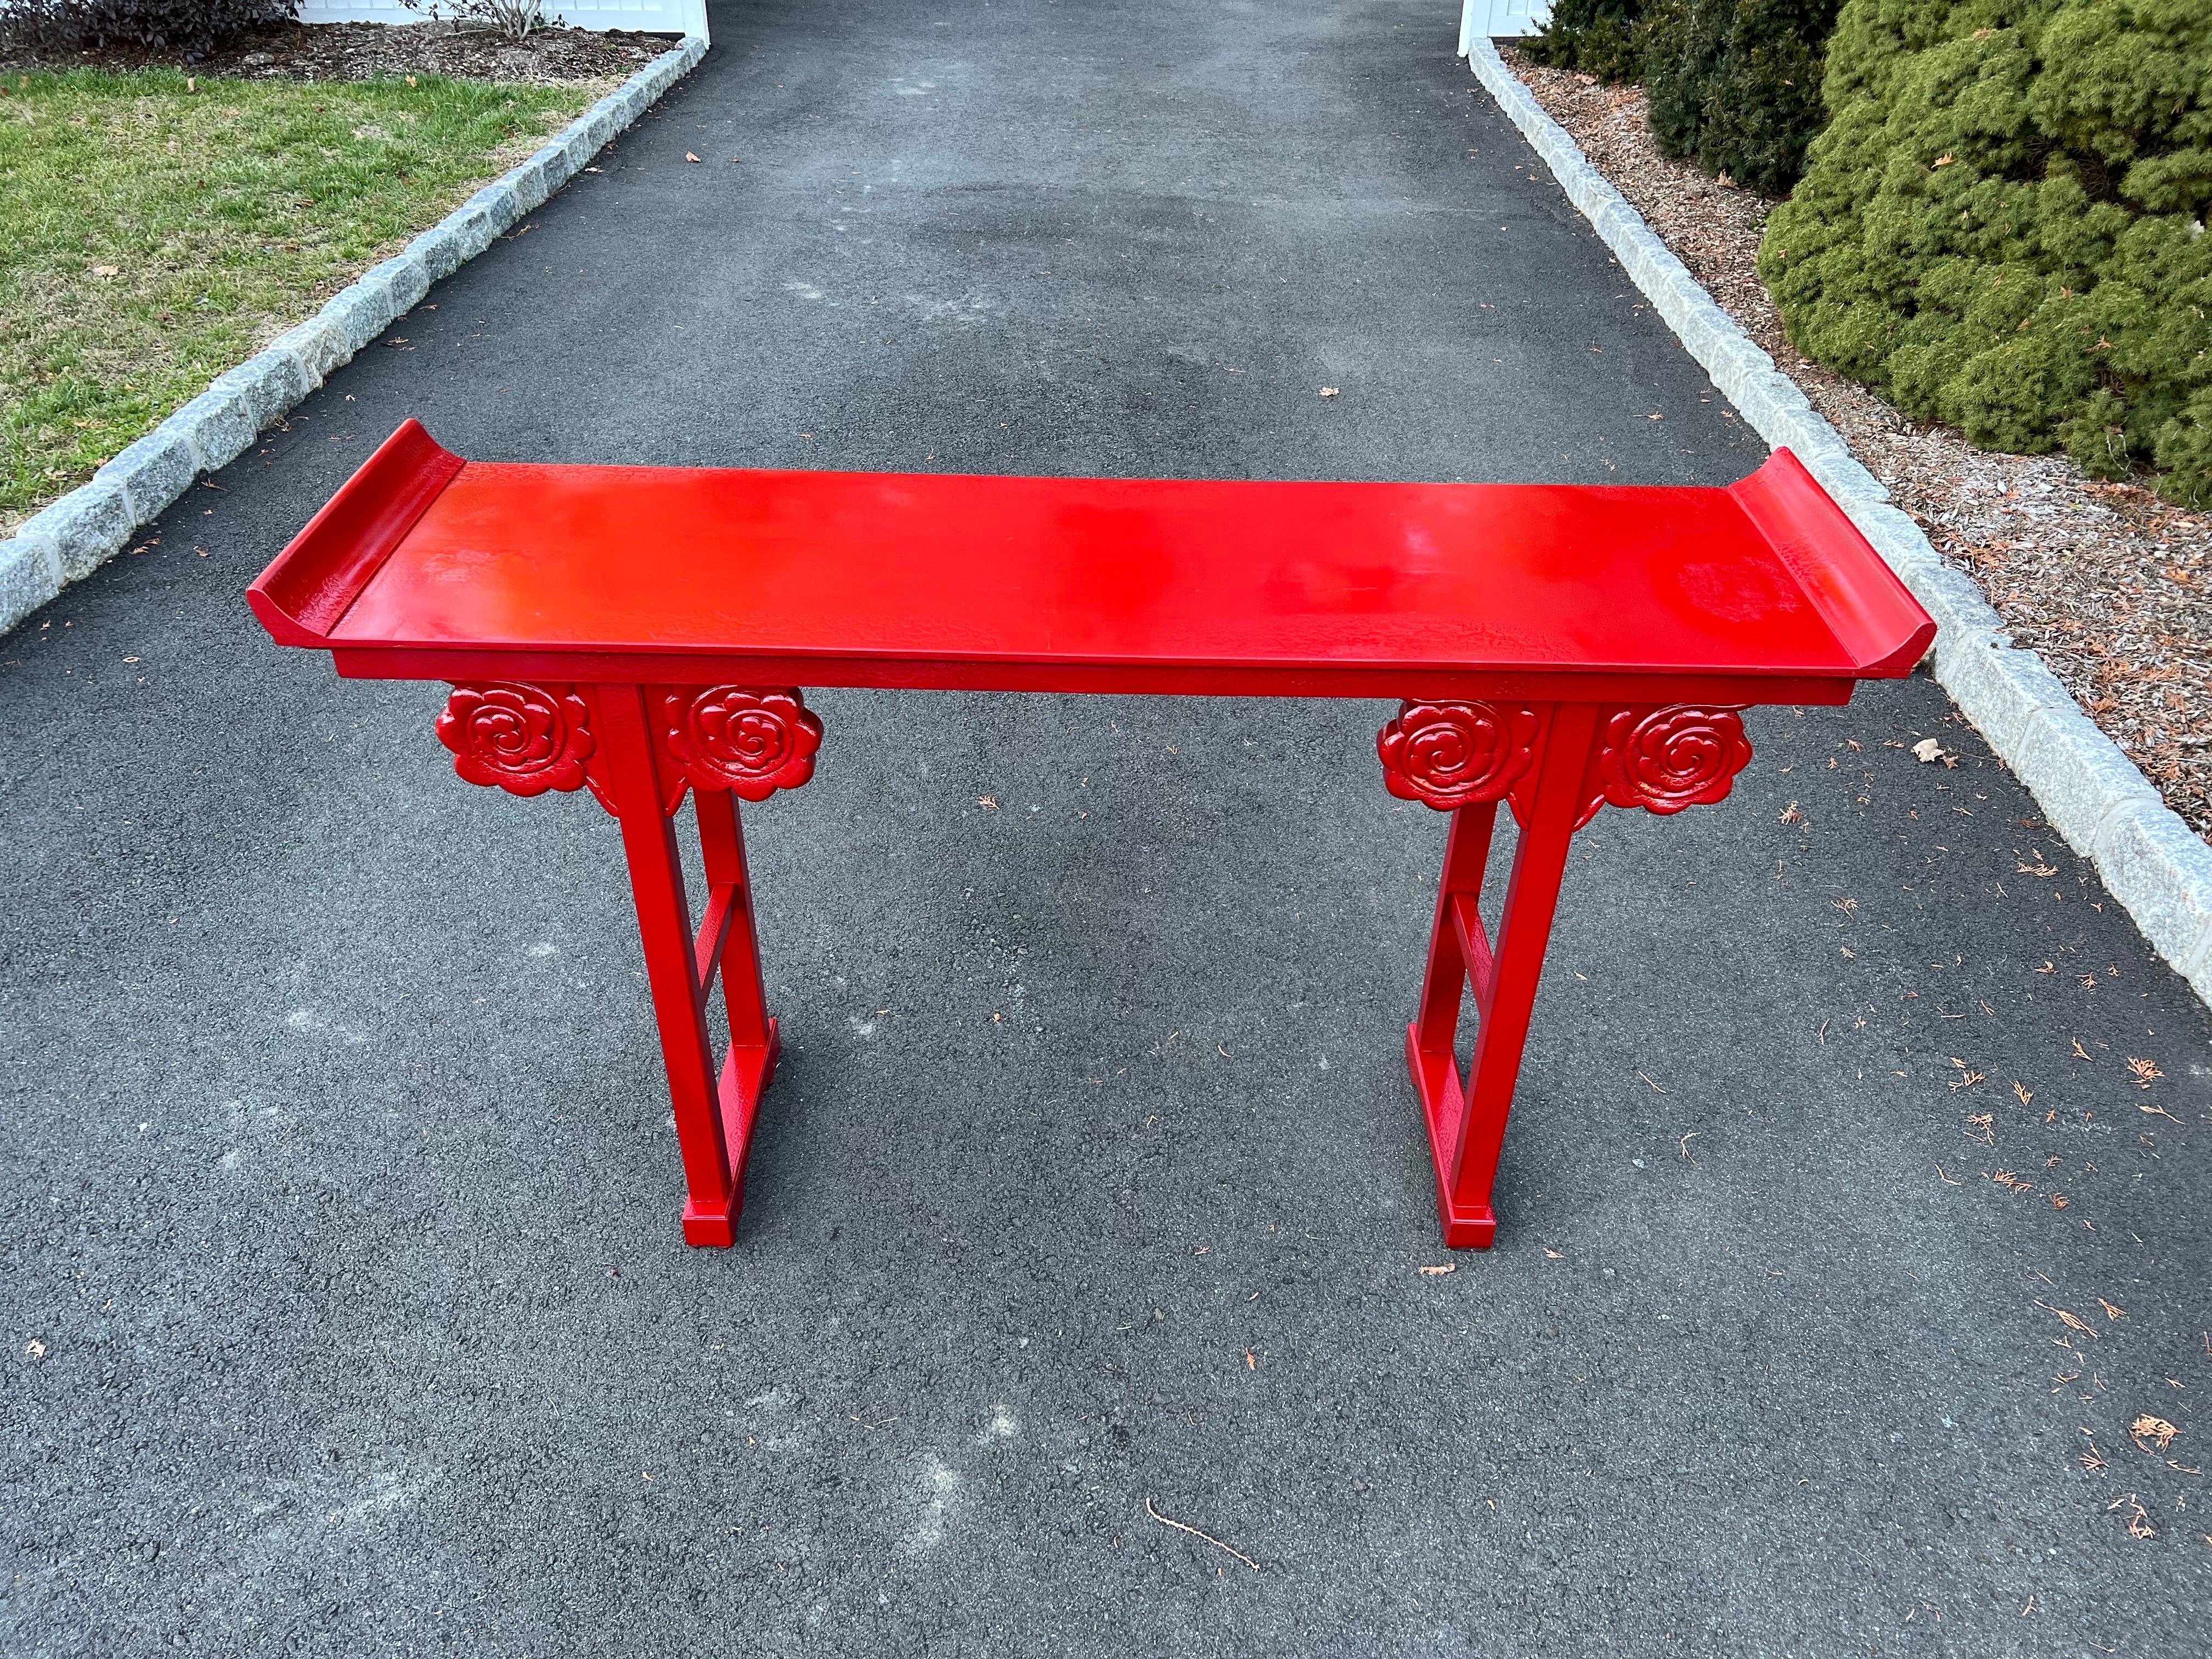 Fire Engine Red Asian console table, Fabulous ,bright piece perfect for lighting up a room.
wonderful curved florette pattern on this traditional altar style table.